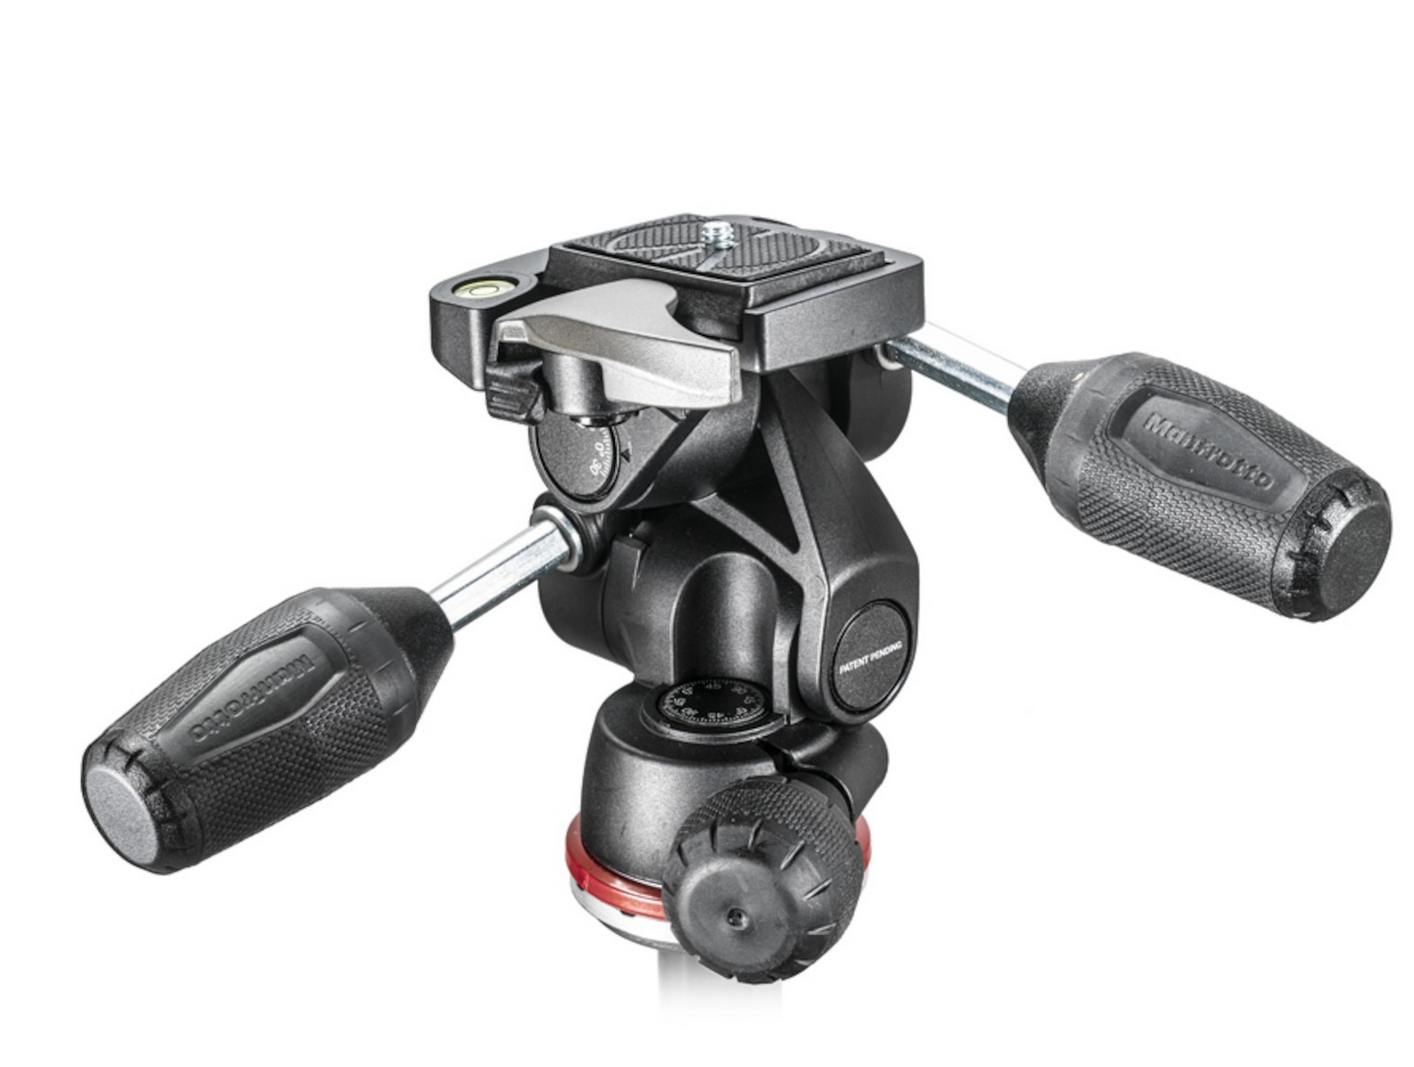 Manfrotto MH804 3 Way Head w/RC2 and retractable levers, tripods 3-way heads, Manfrotto - Pictureline  - 1